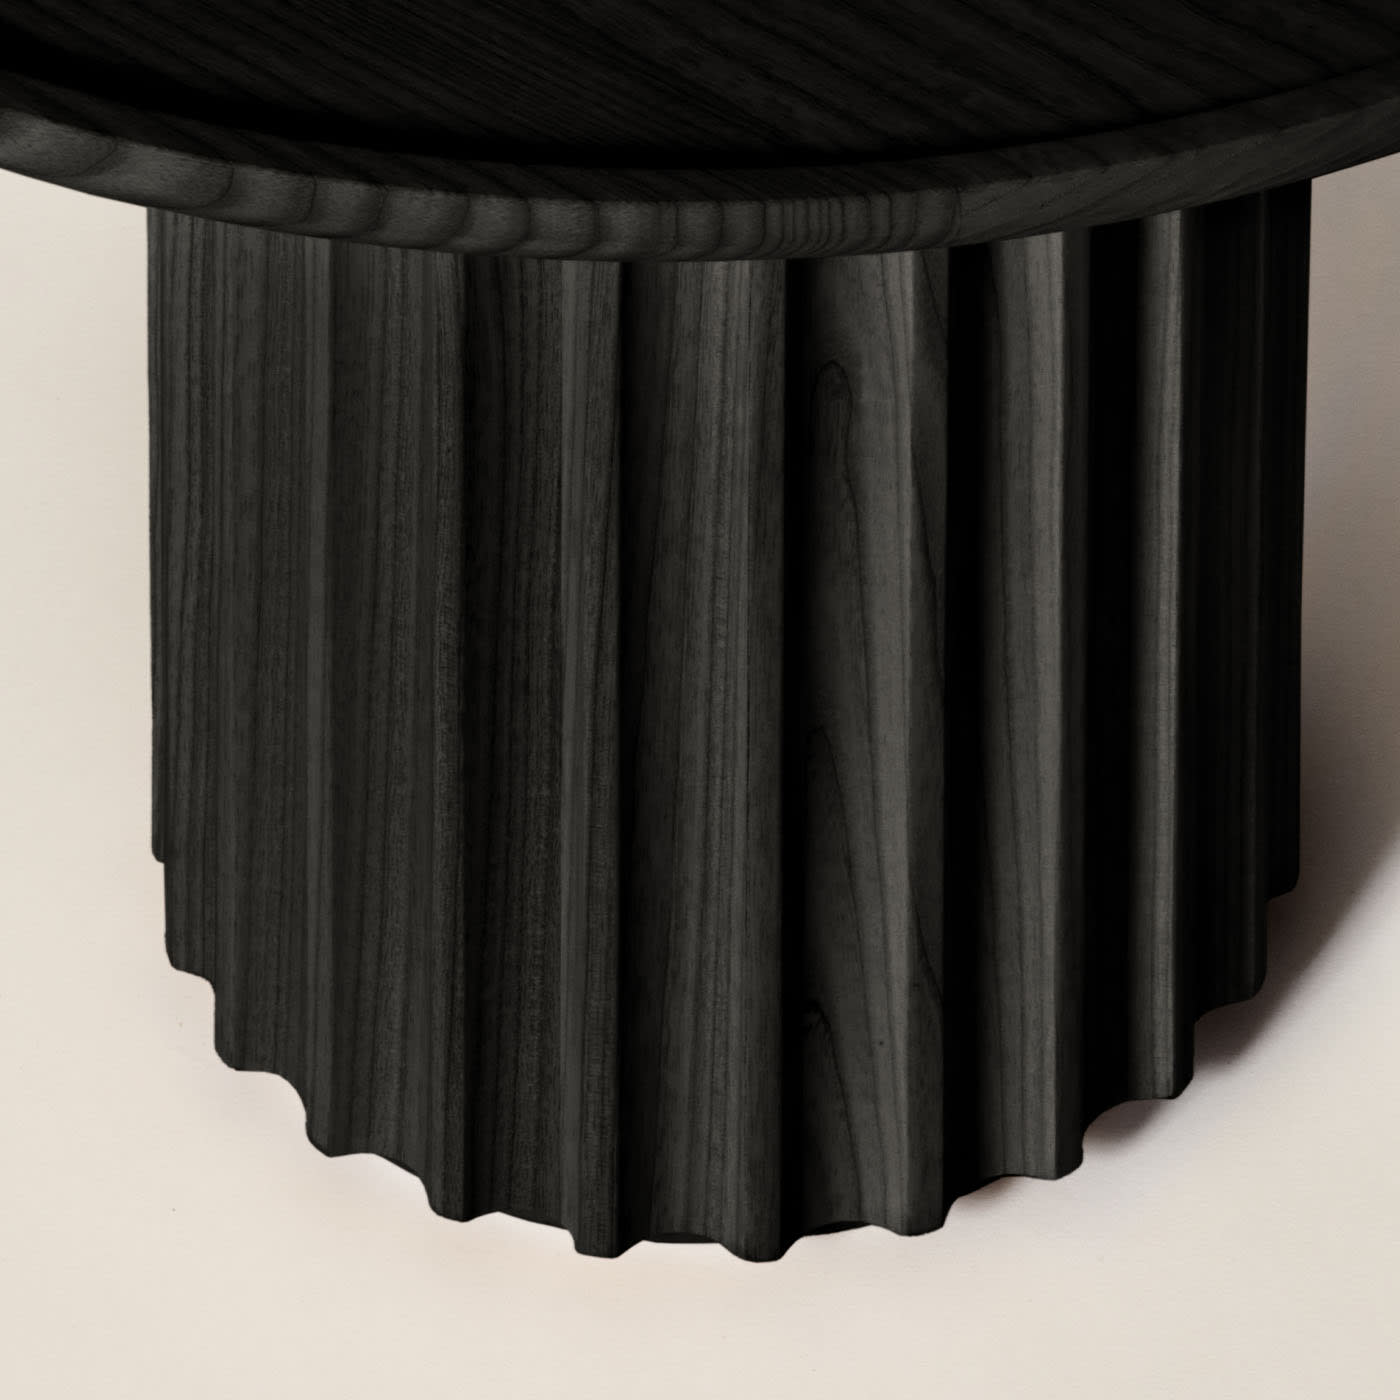 Capitello Luxury Black Side Table Crafted in Italy